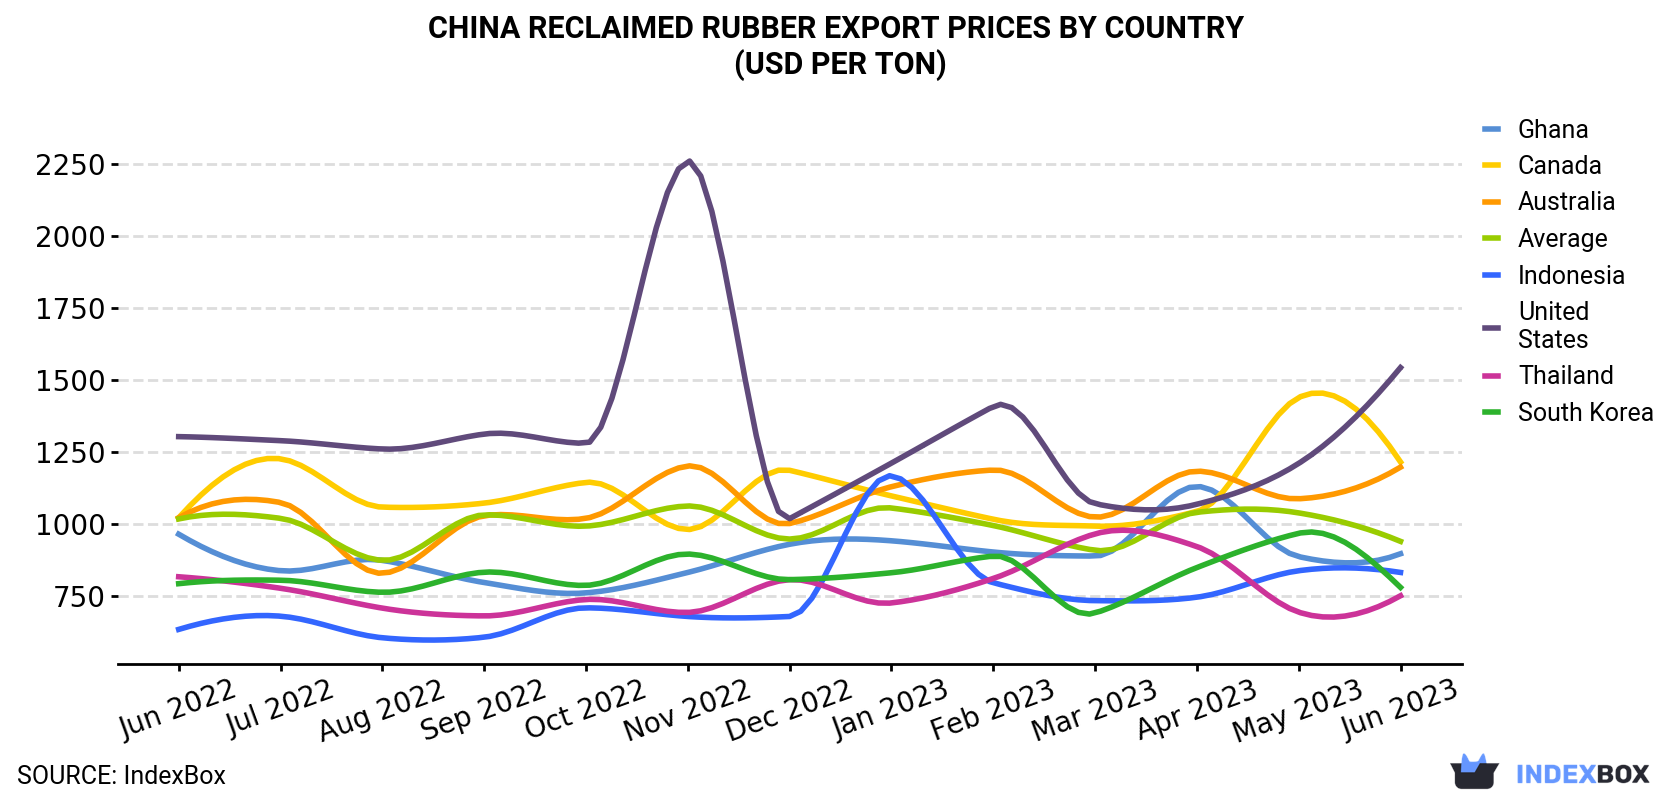 China Reclaimed Rubber Export Prices By Country (USD Per Ton)